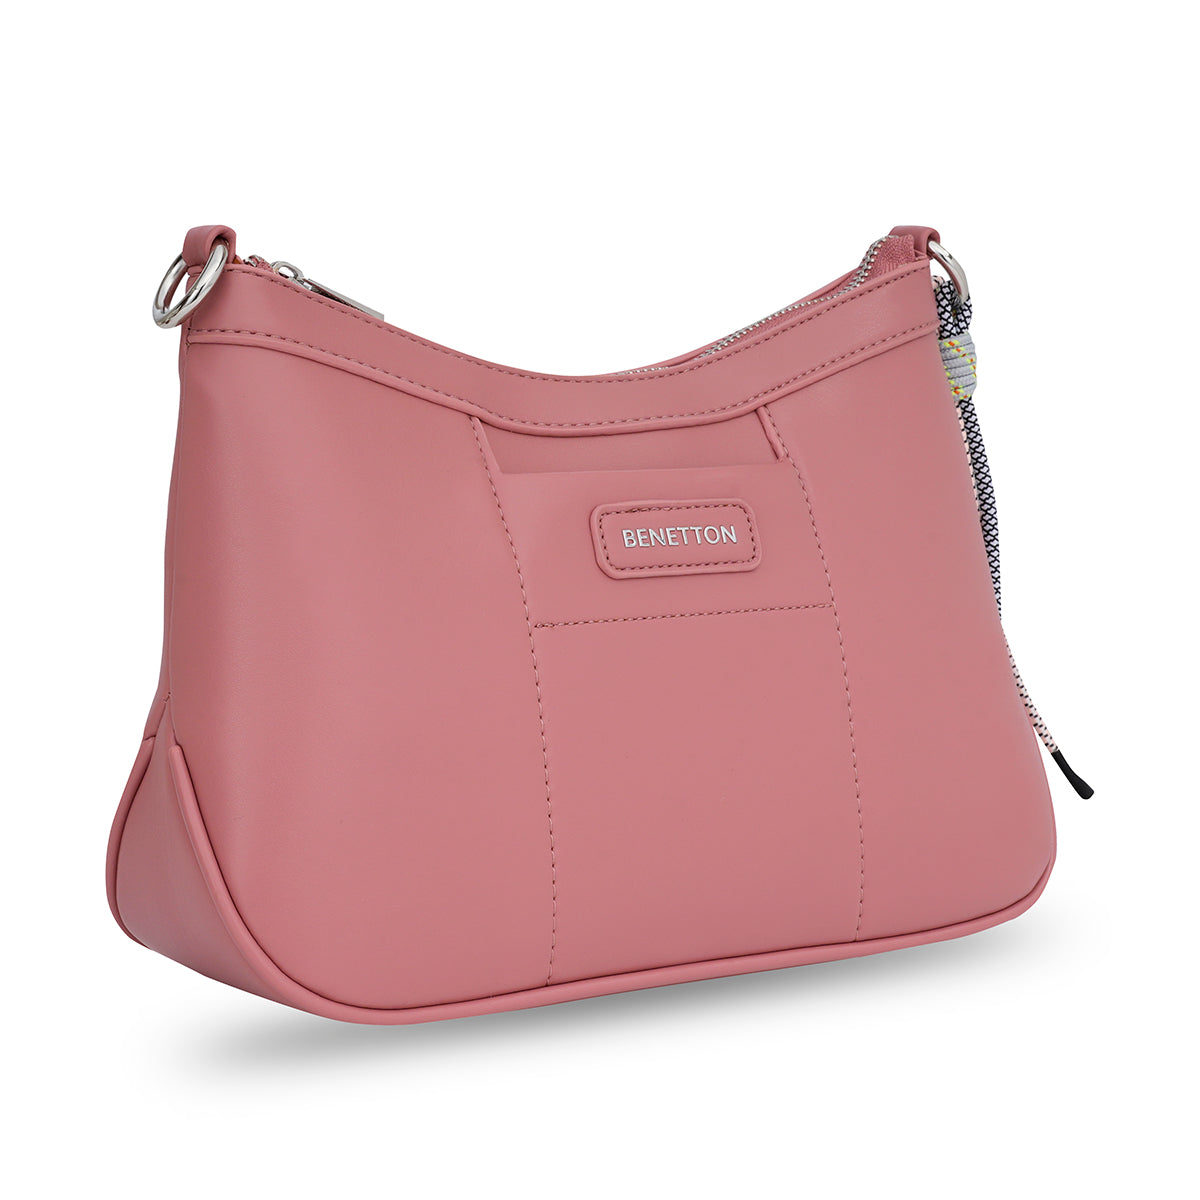 United Colors of Benetton Evelin Baguette Pink